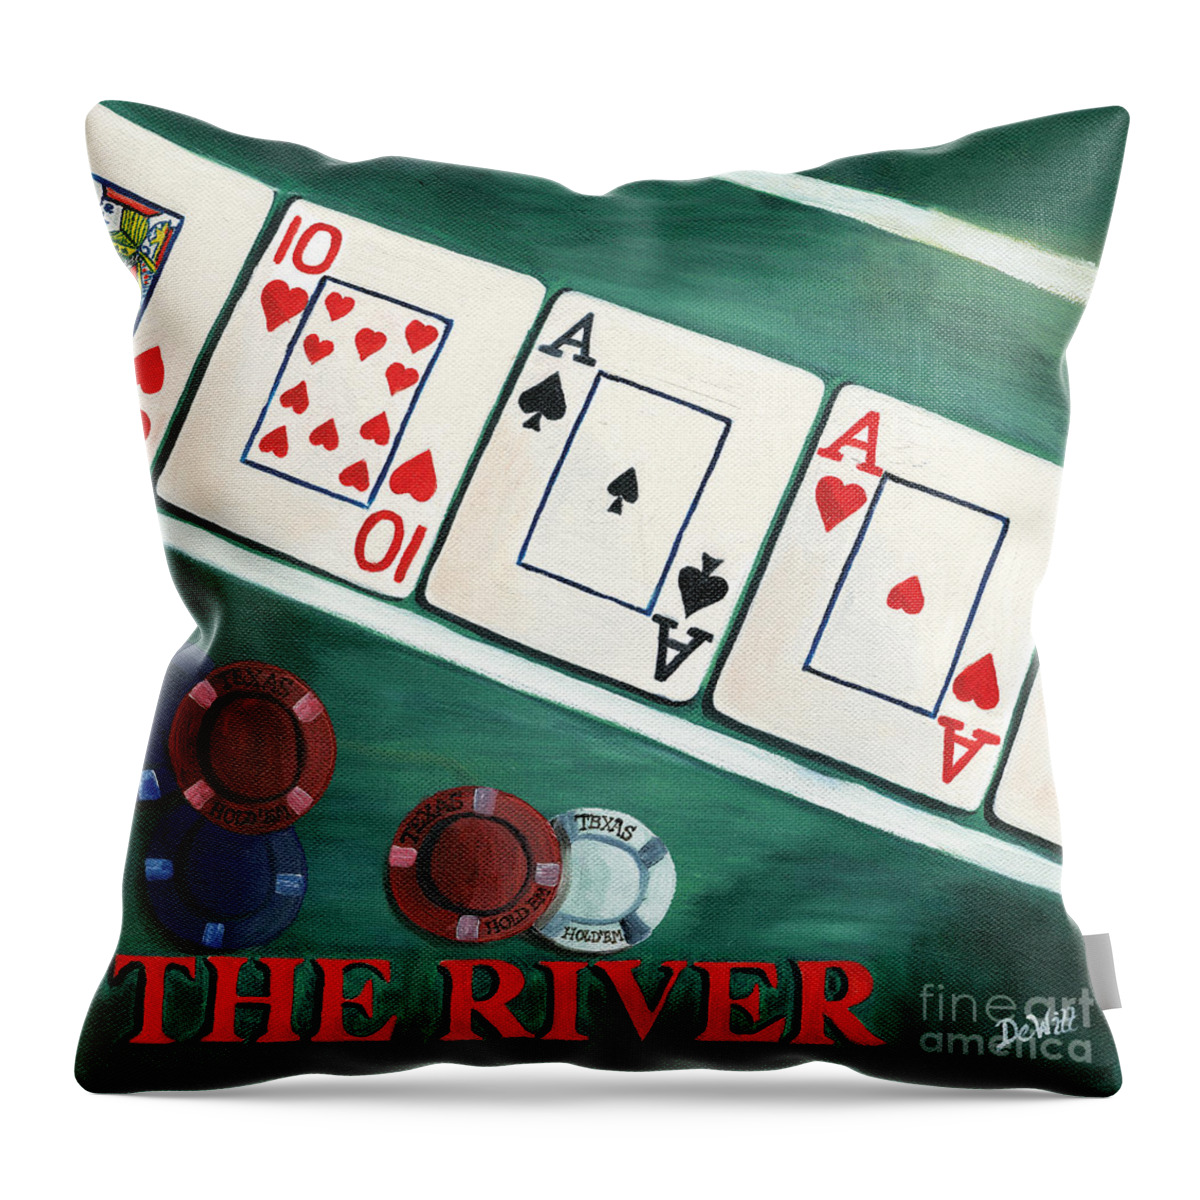 The River Throw Pillow featuring the painting The River by Debbie DeWitt